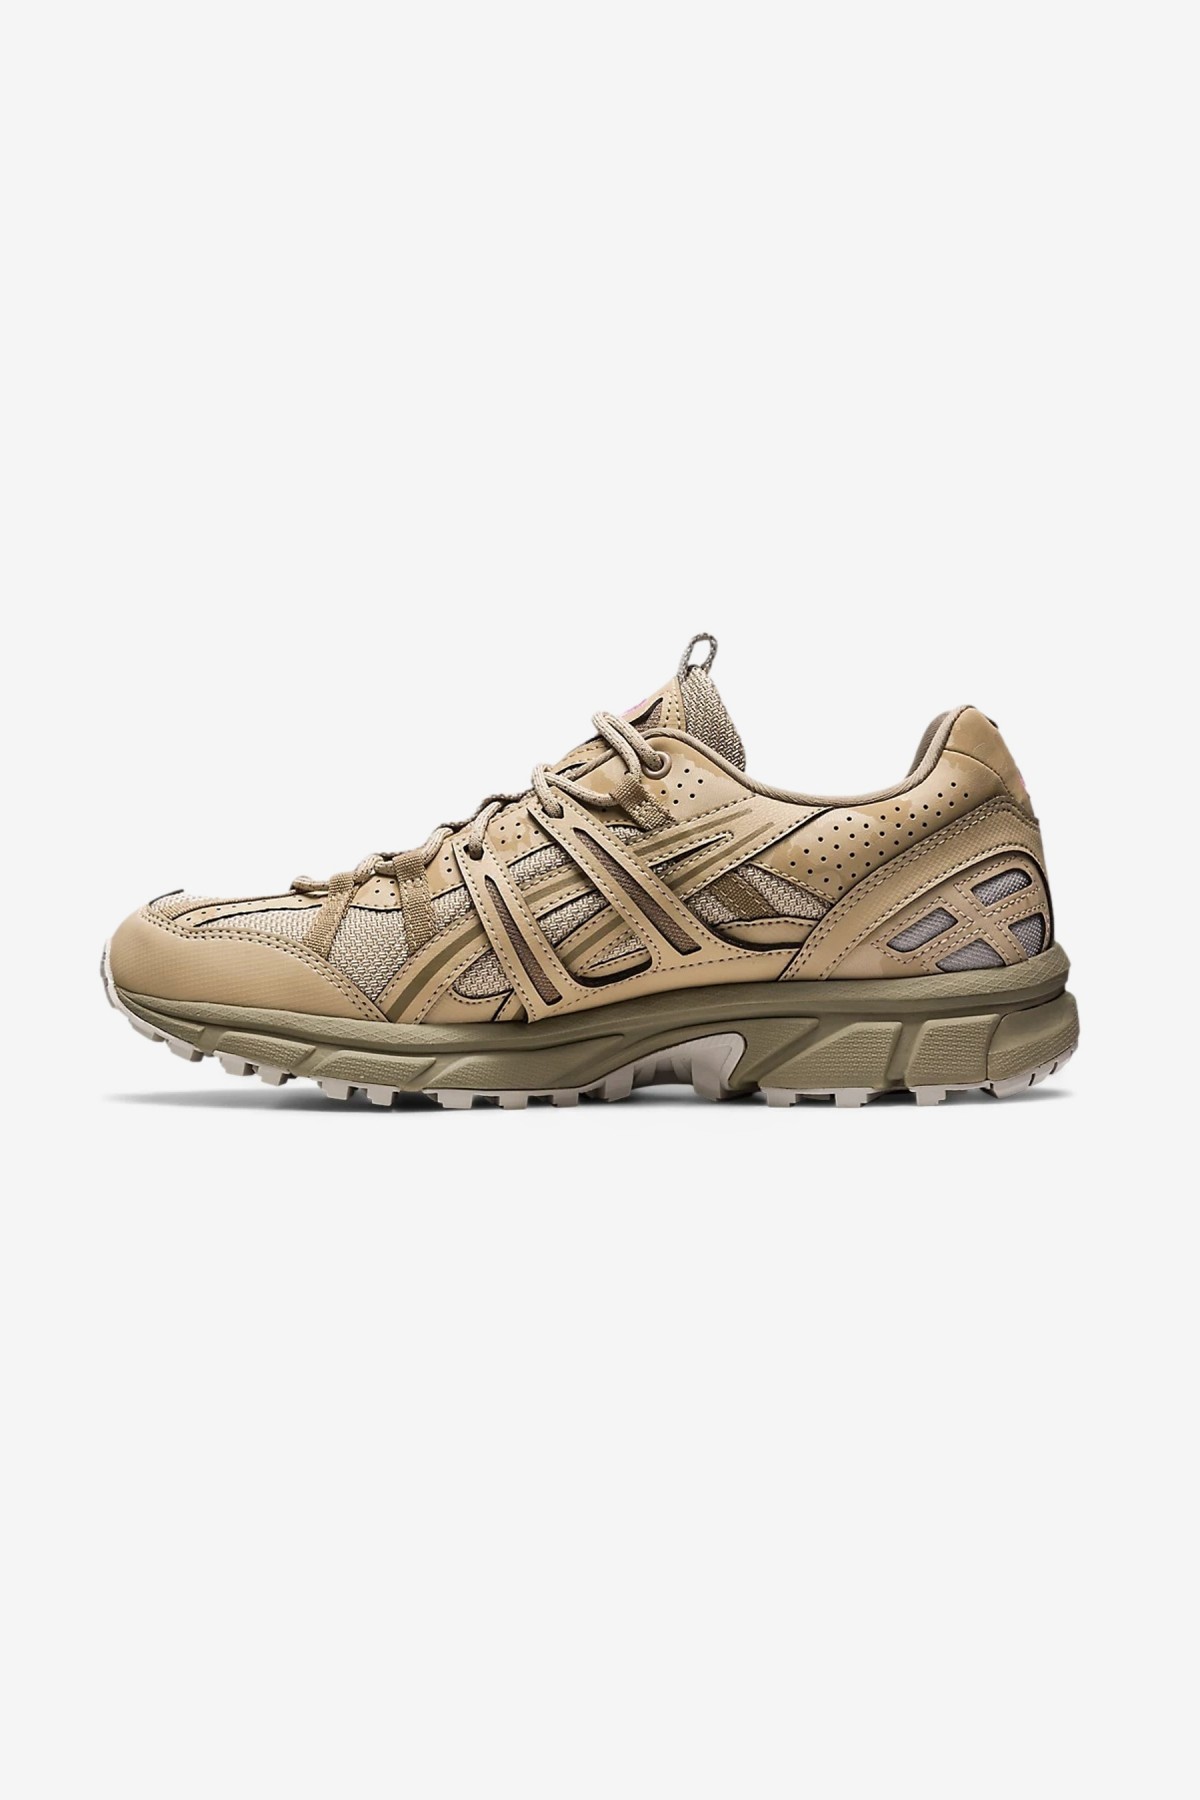 Asics Gel-Sonoma 15-50 in Feather Grey/Wood Crepe